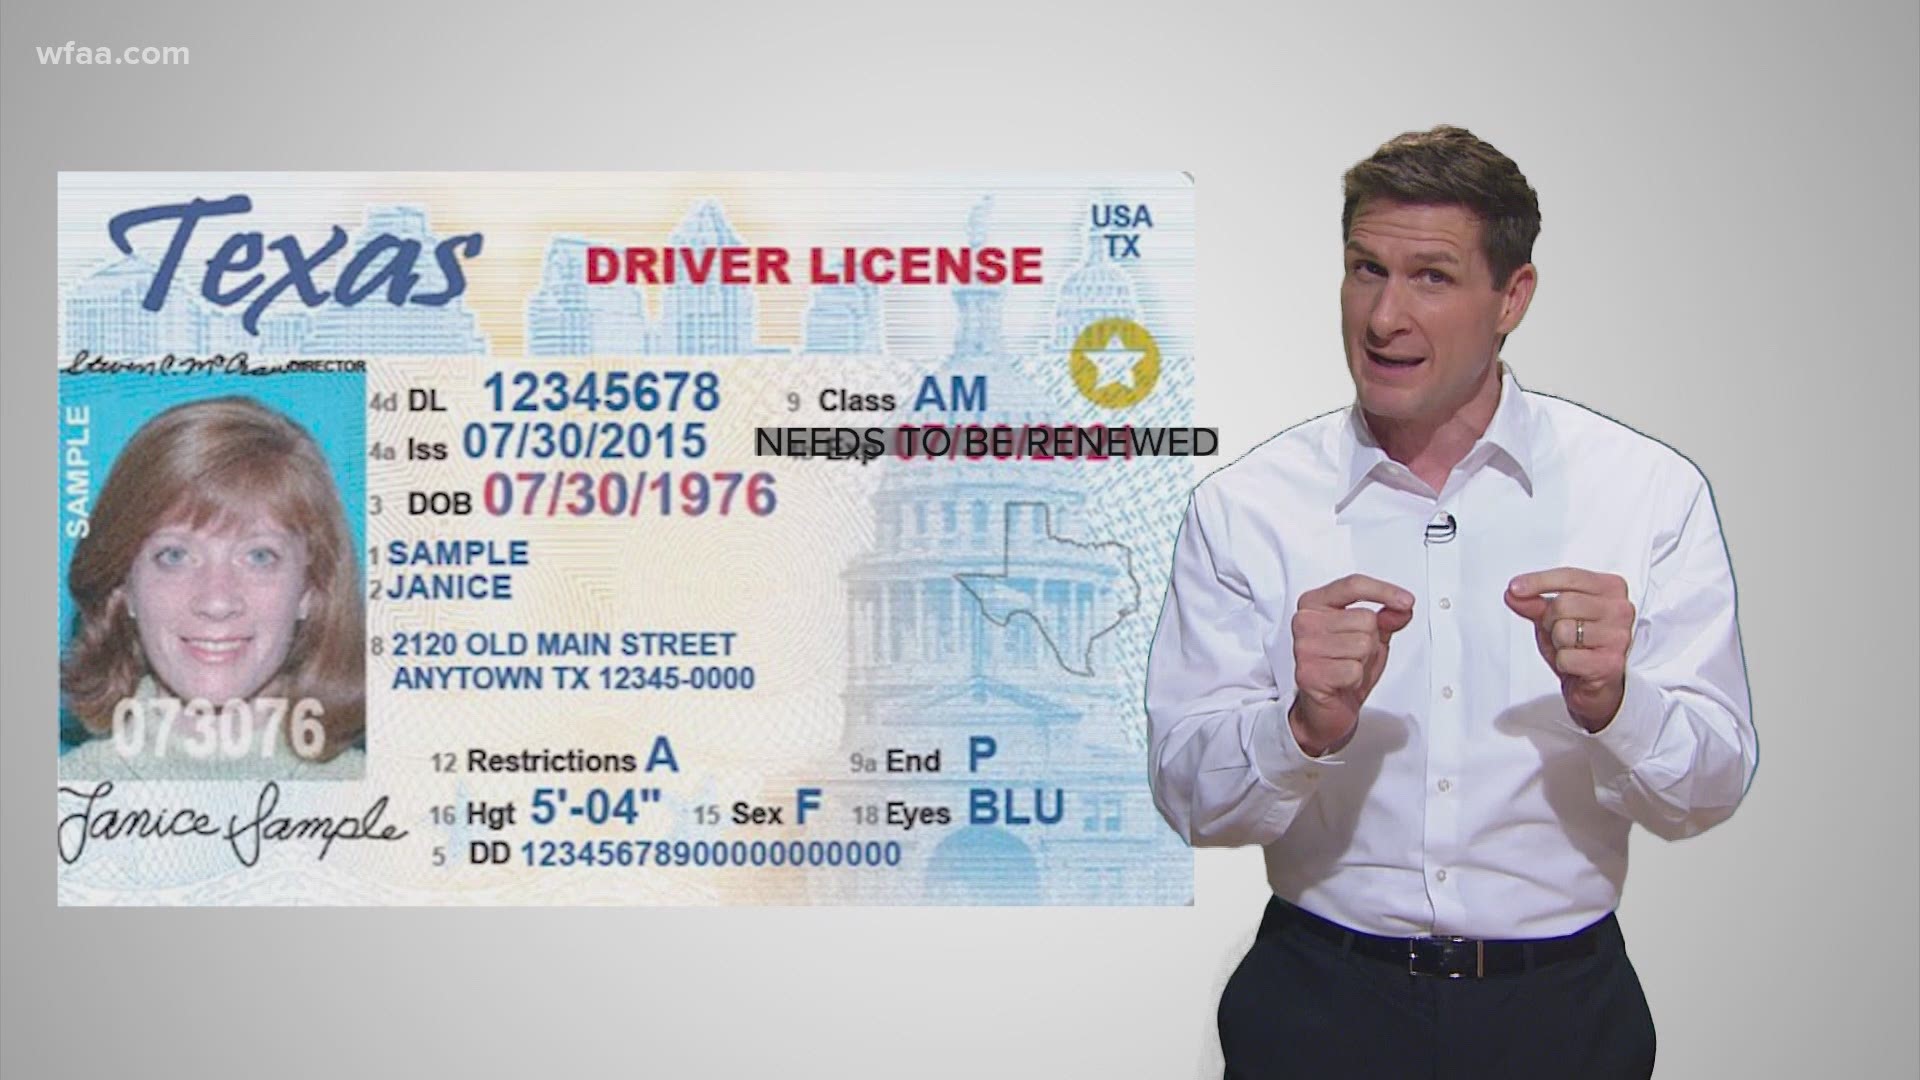 Right now, Texans are allowed to drive with out-of-date licenses as DPS completely changes how it does business during the pandemic.